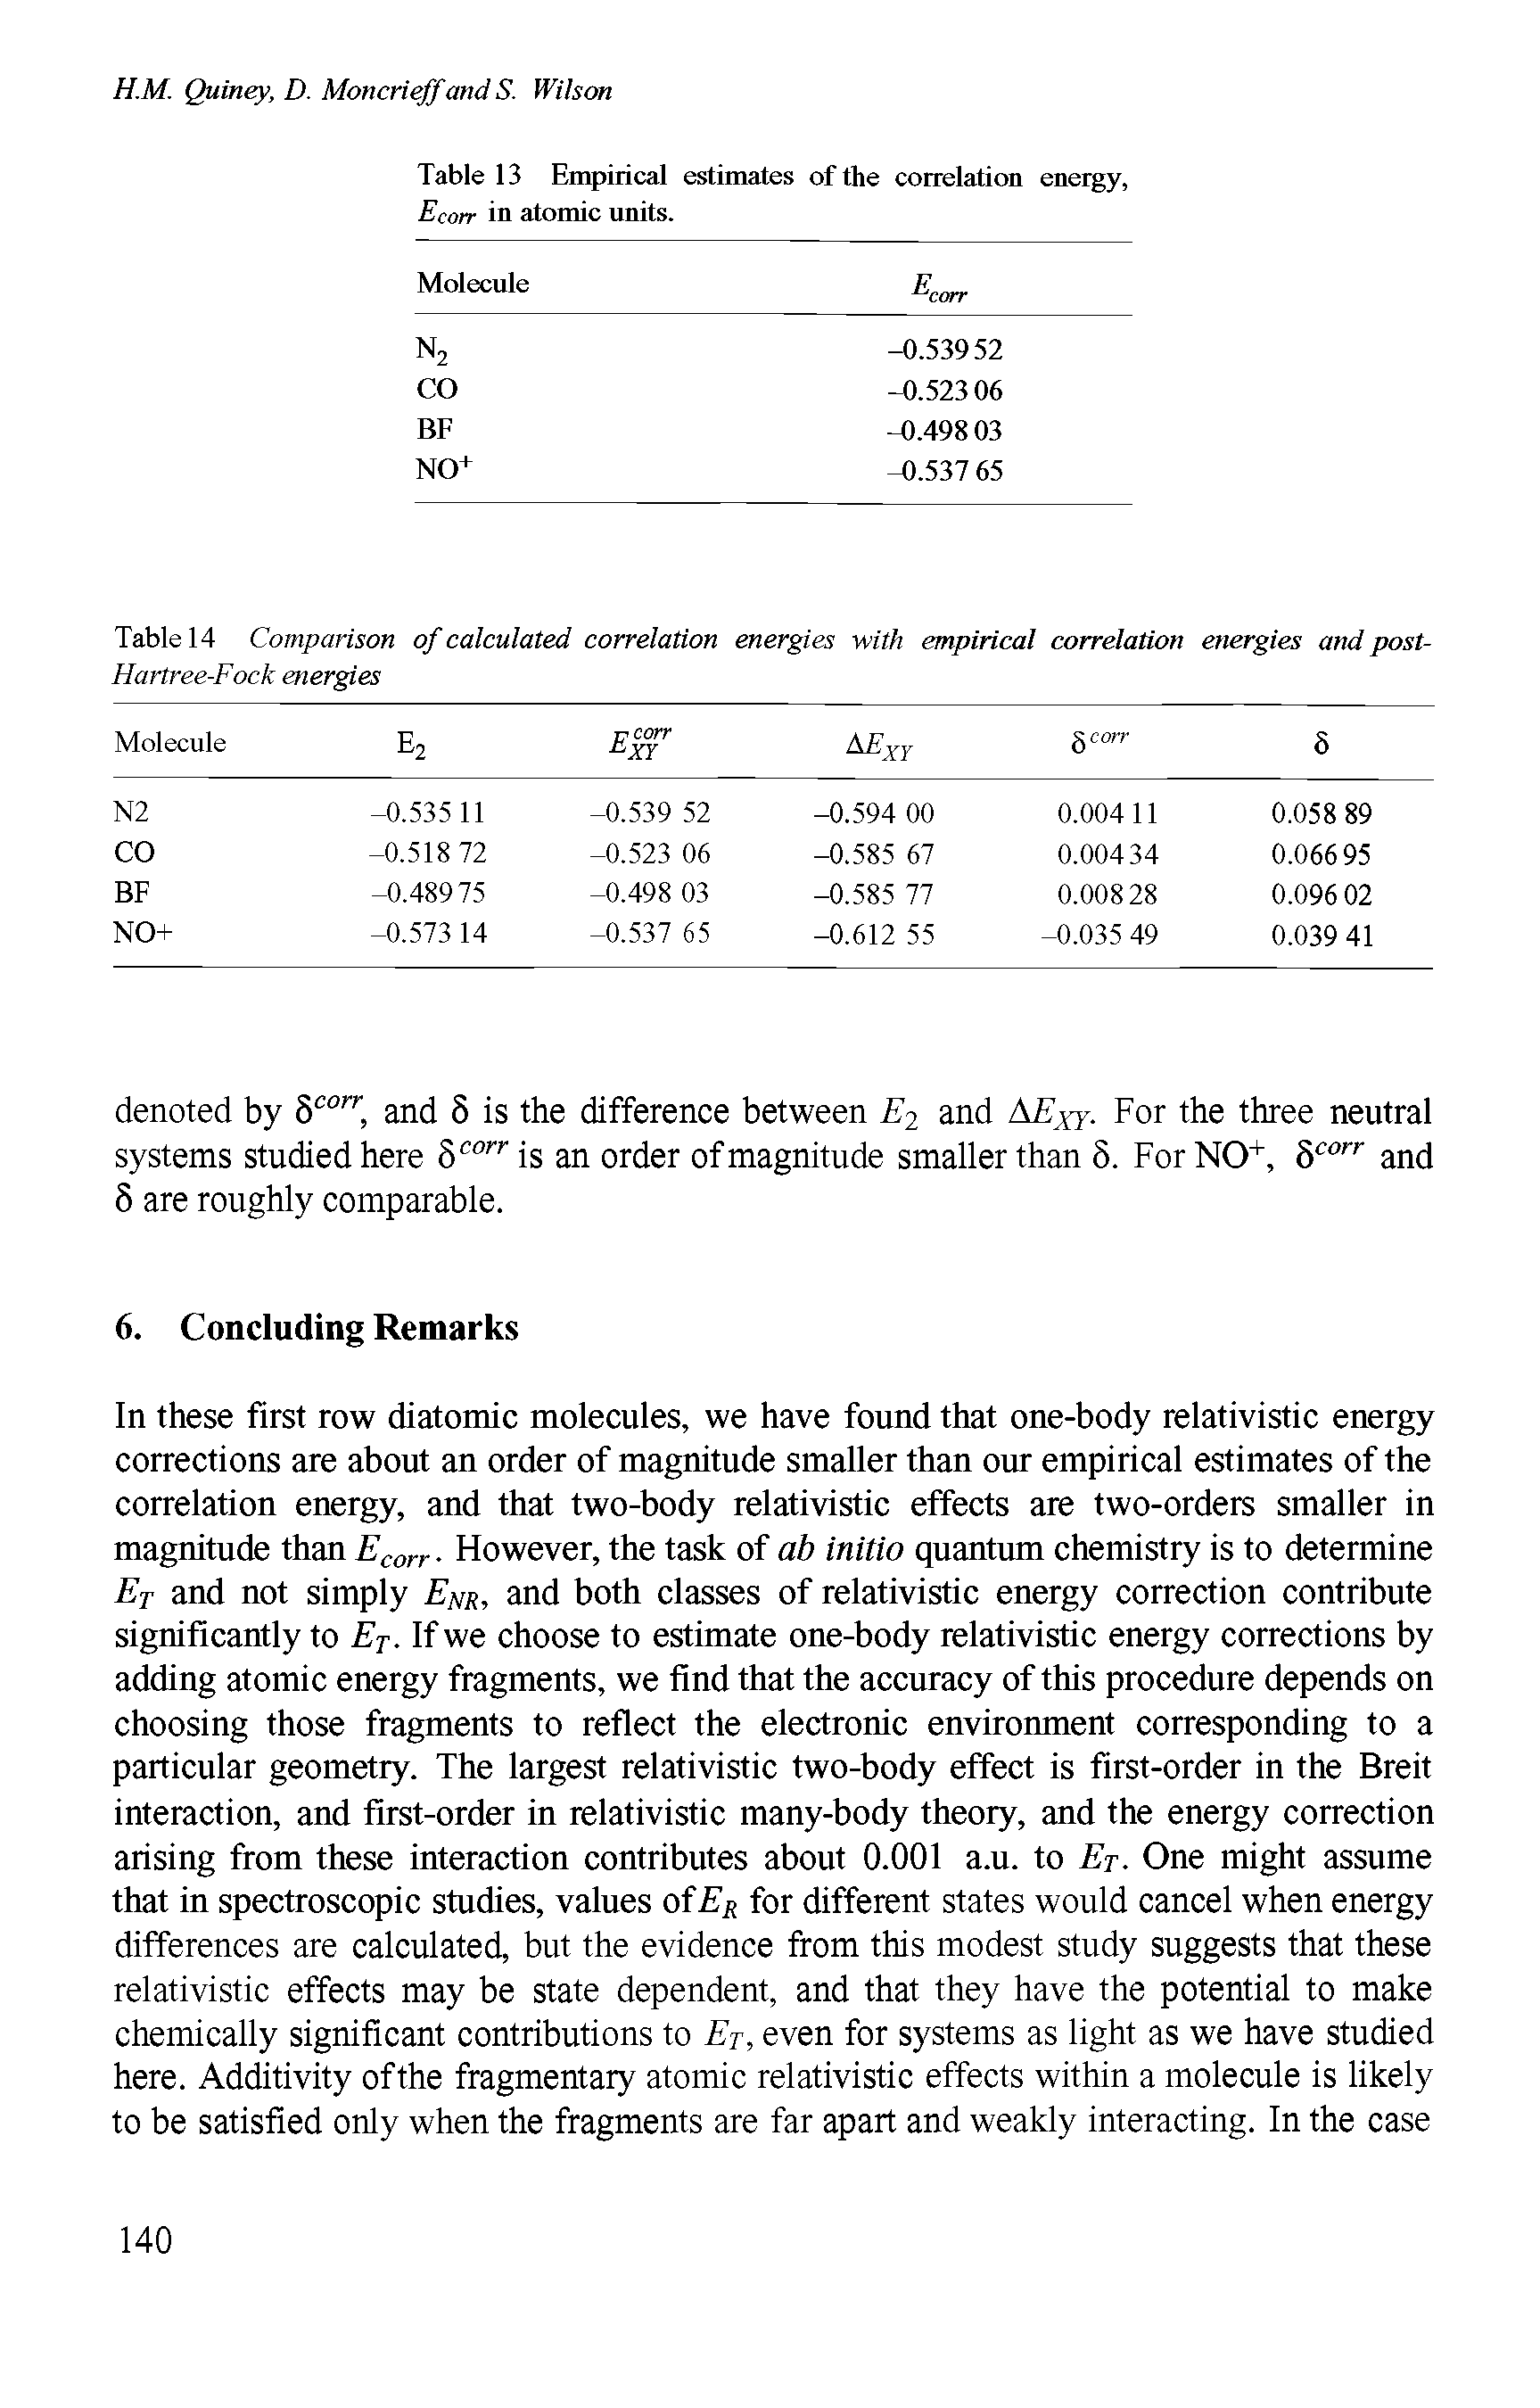 Table 14 Comparison of calculated correlation energies with empirical correlation energies and post-Hartree-Fock energies...